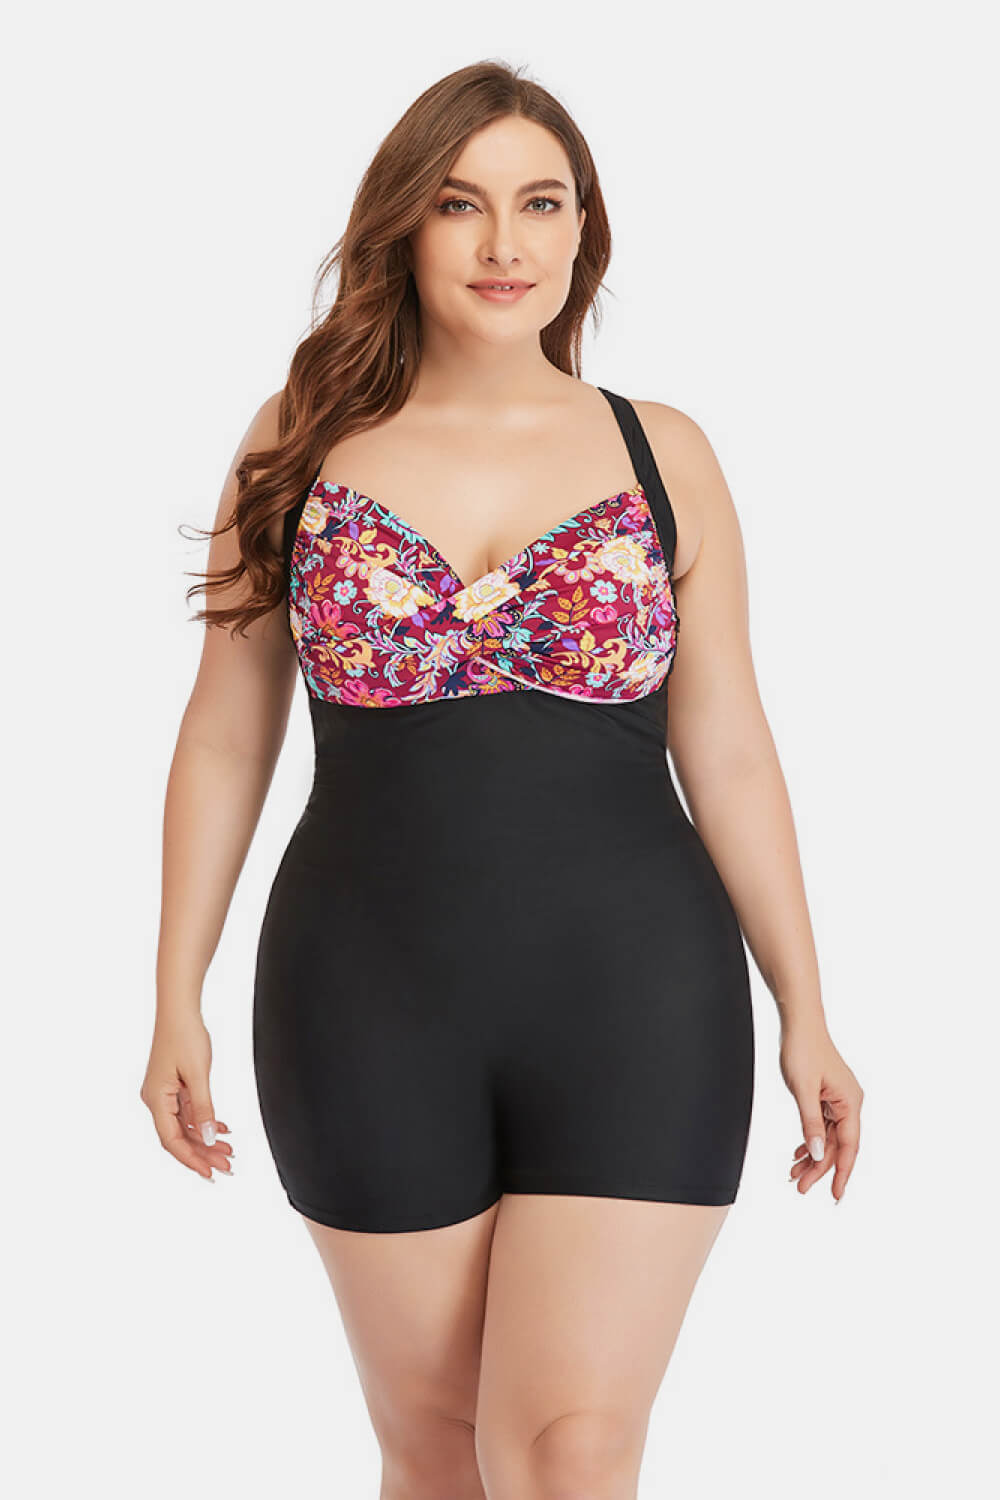 LYB Swimwear Plus Size Solid Floral Contrast One Piece Swimsuit